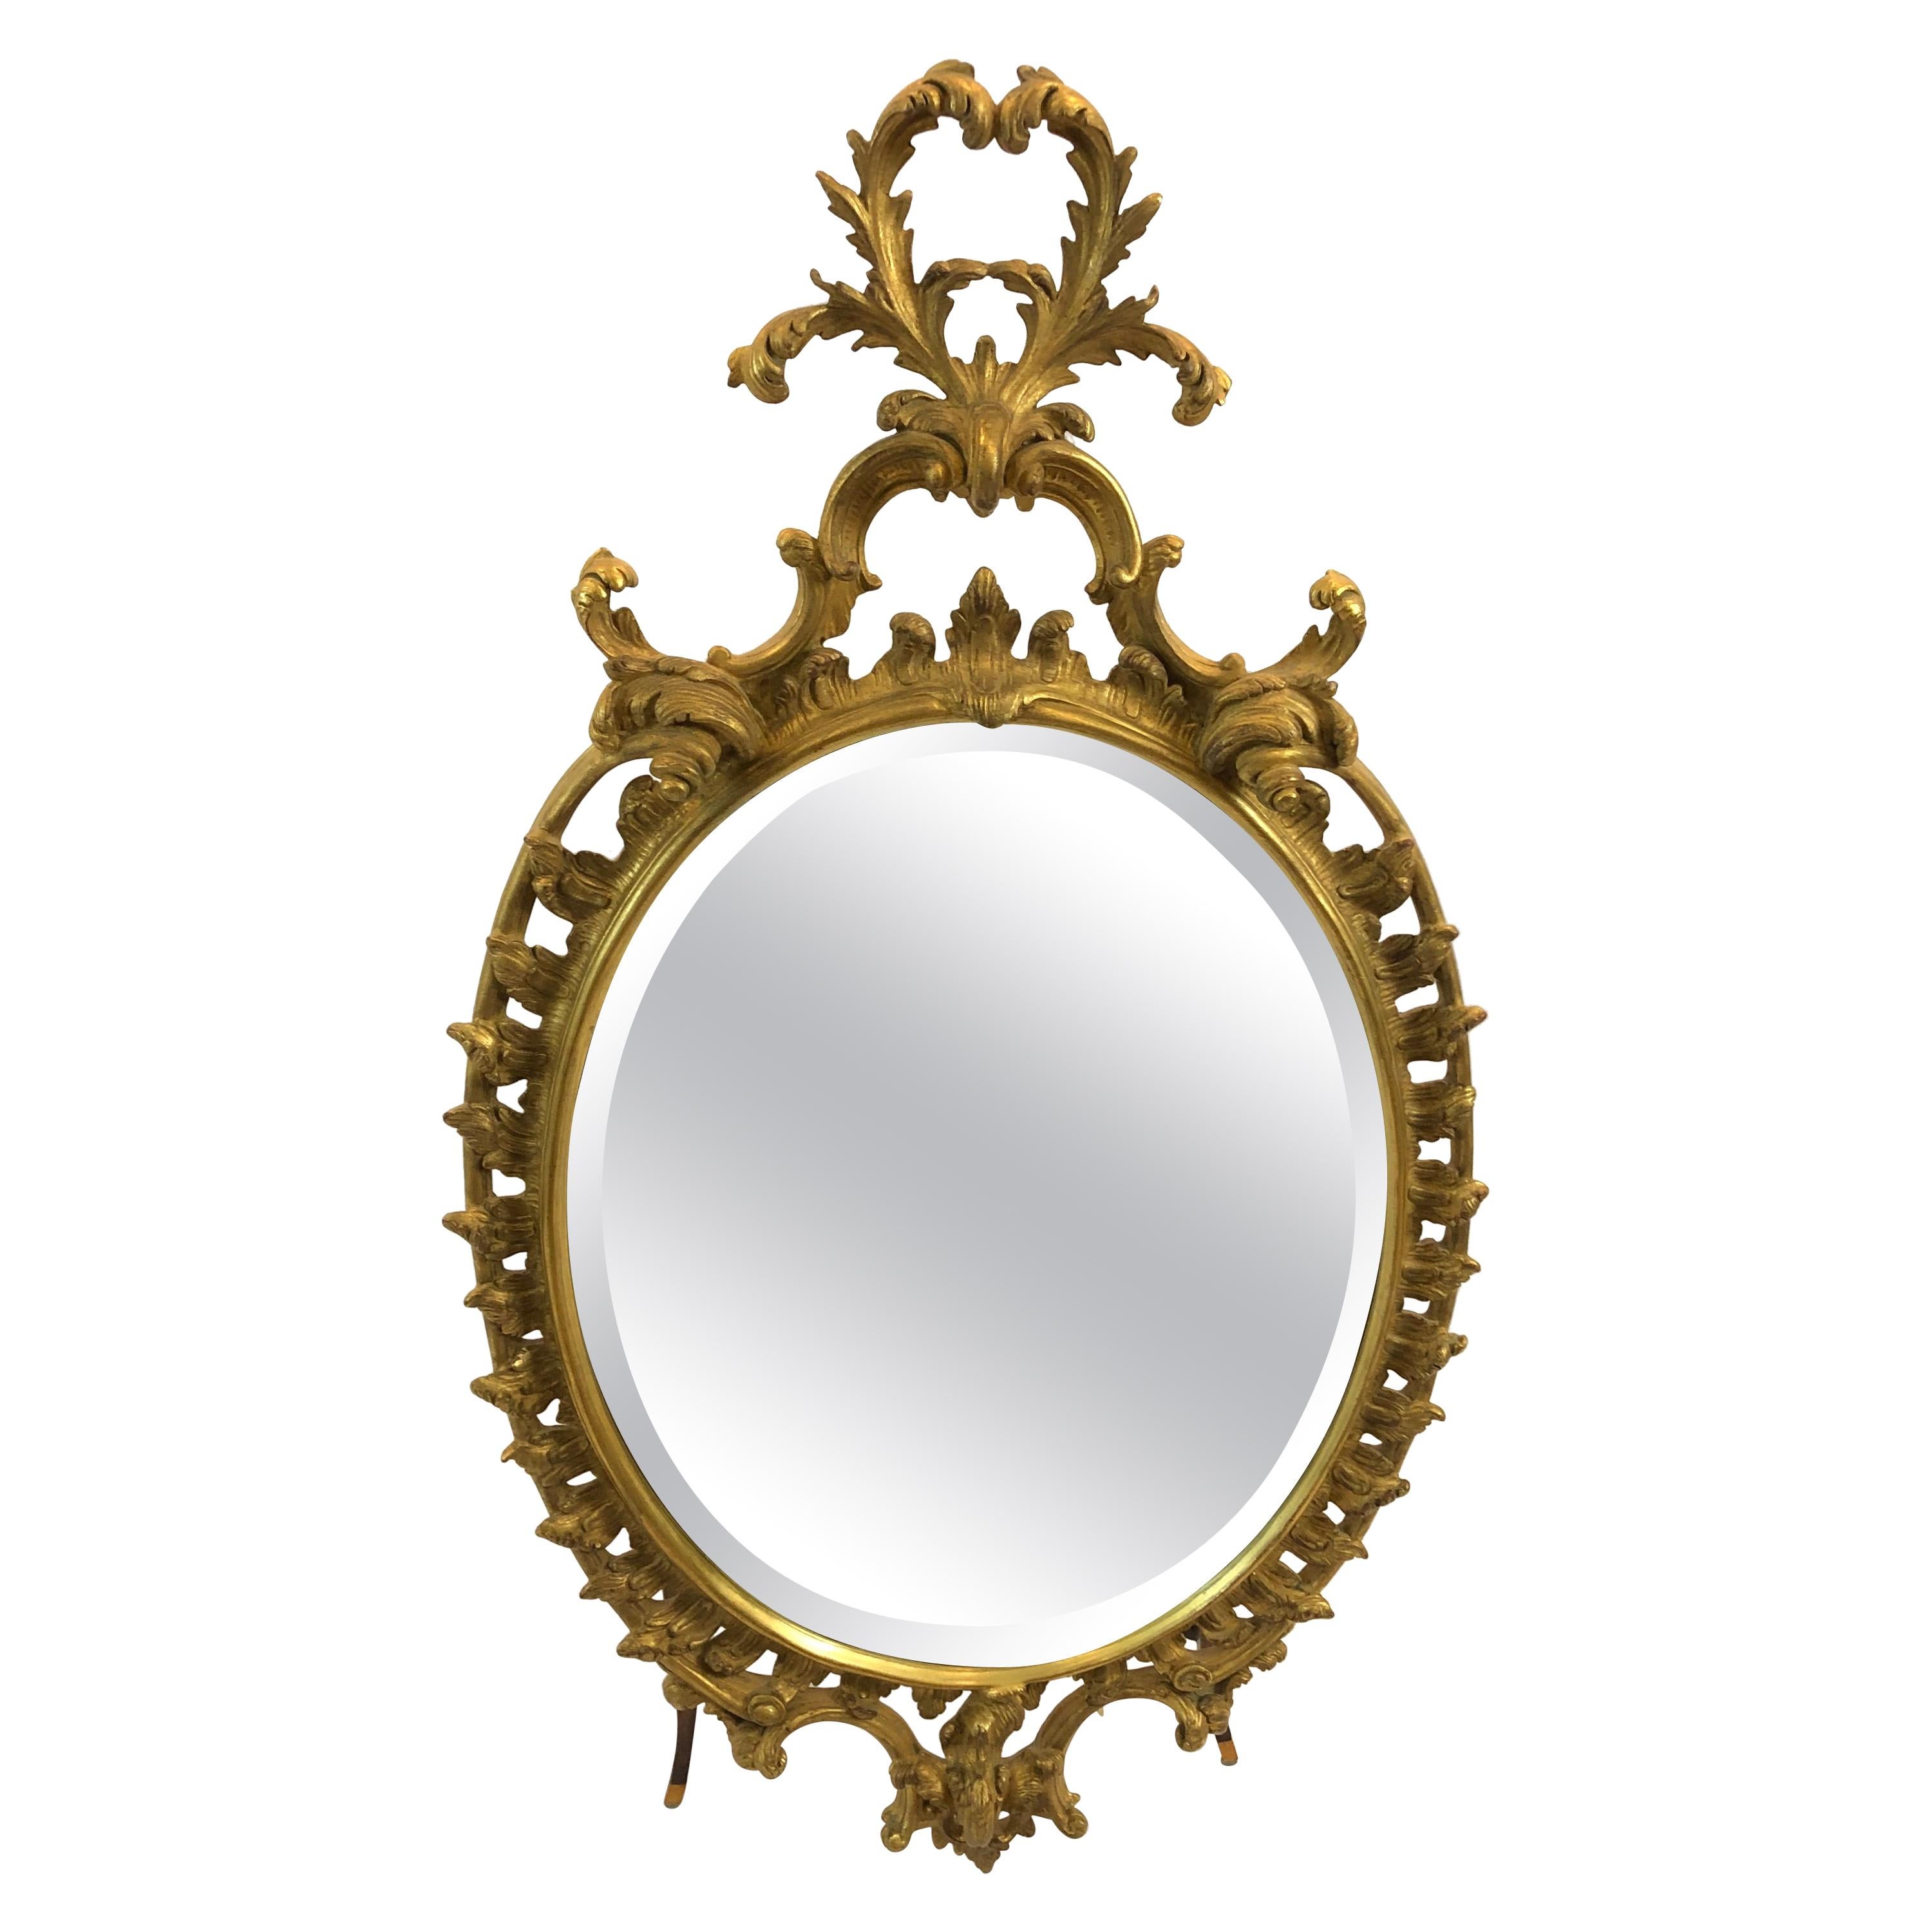 Lovely Oval French Style Giltwood Mirror